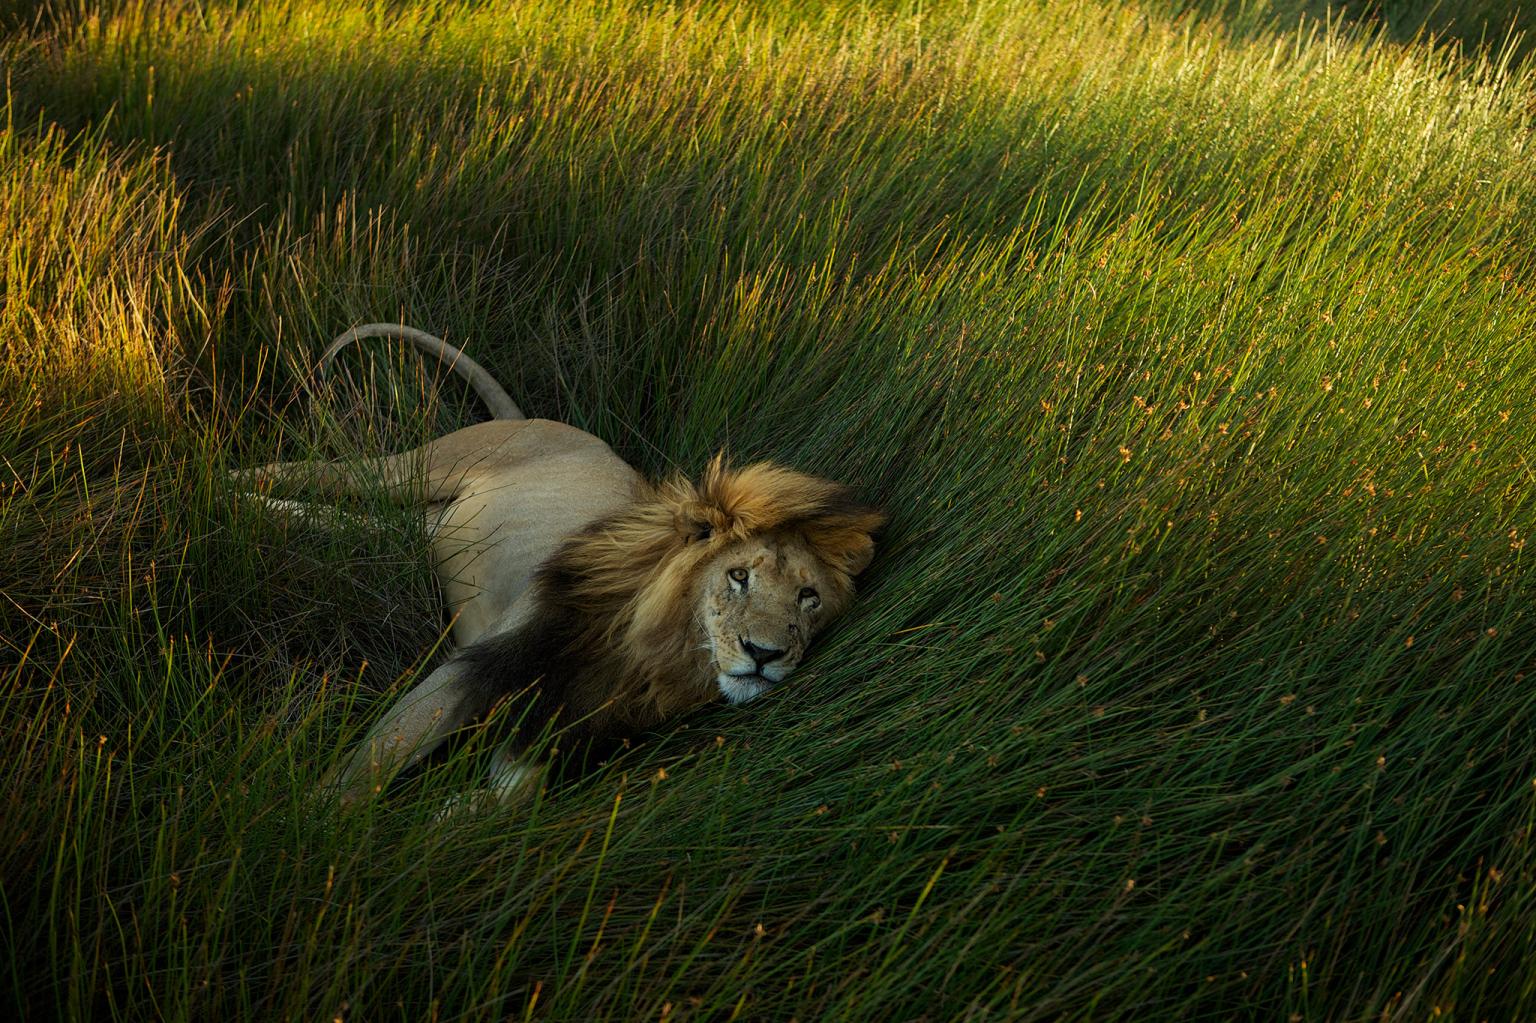 A lion rests in the grass of the Serengeti plains